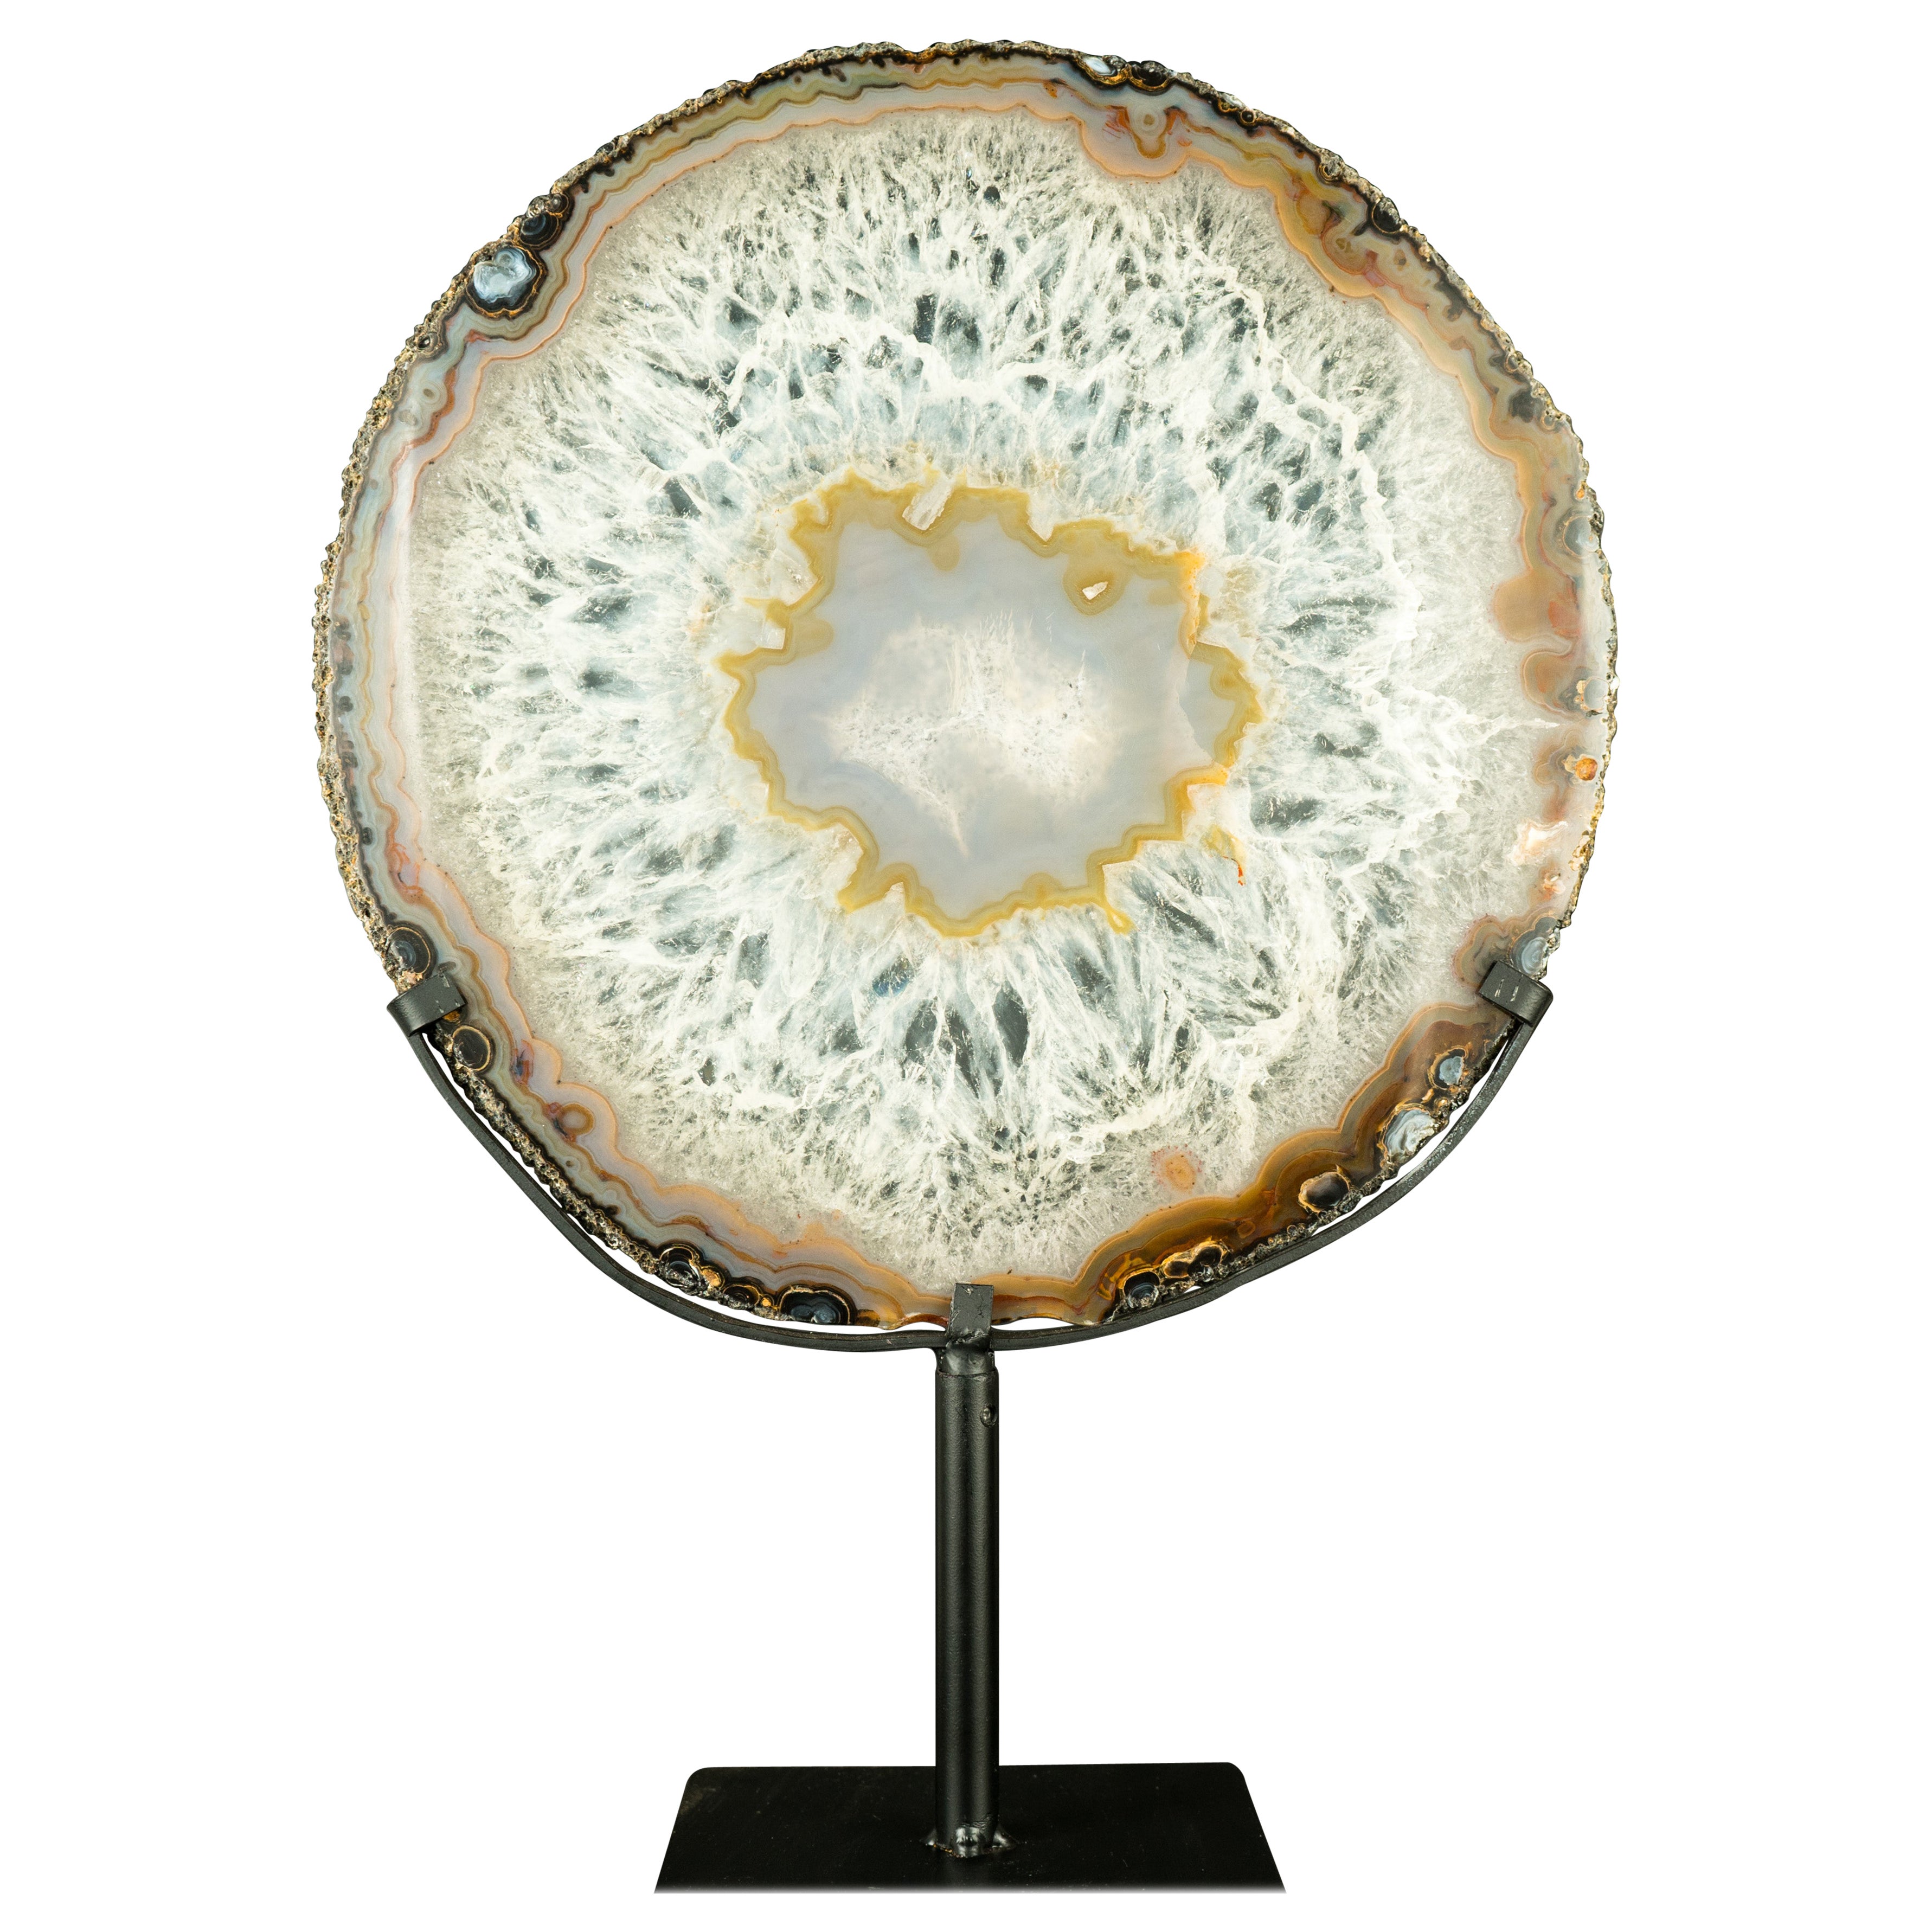 Gallery Grade Large Lace Agate Slice, with Ice-Like Crystal and Colorful Agate